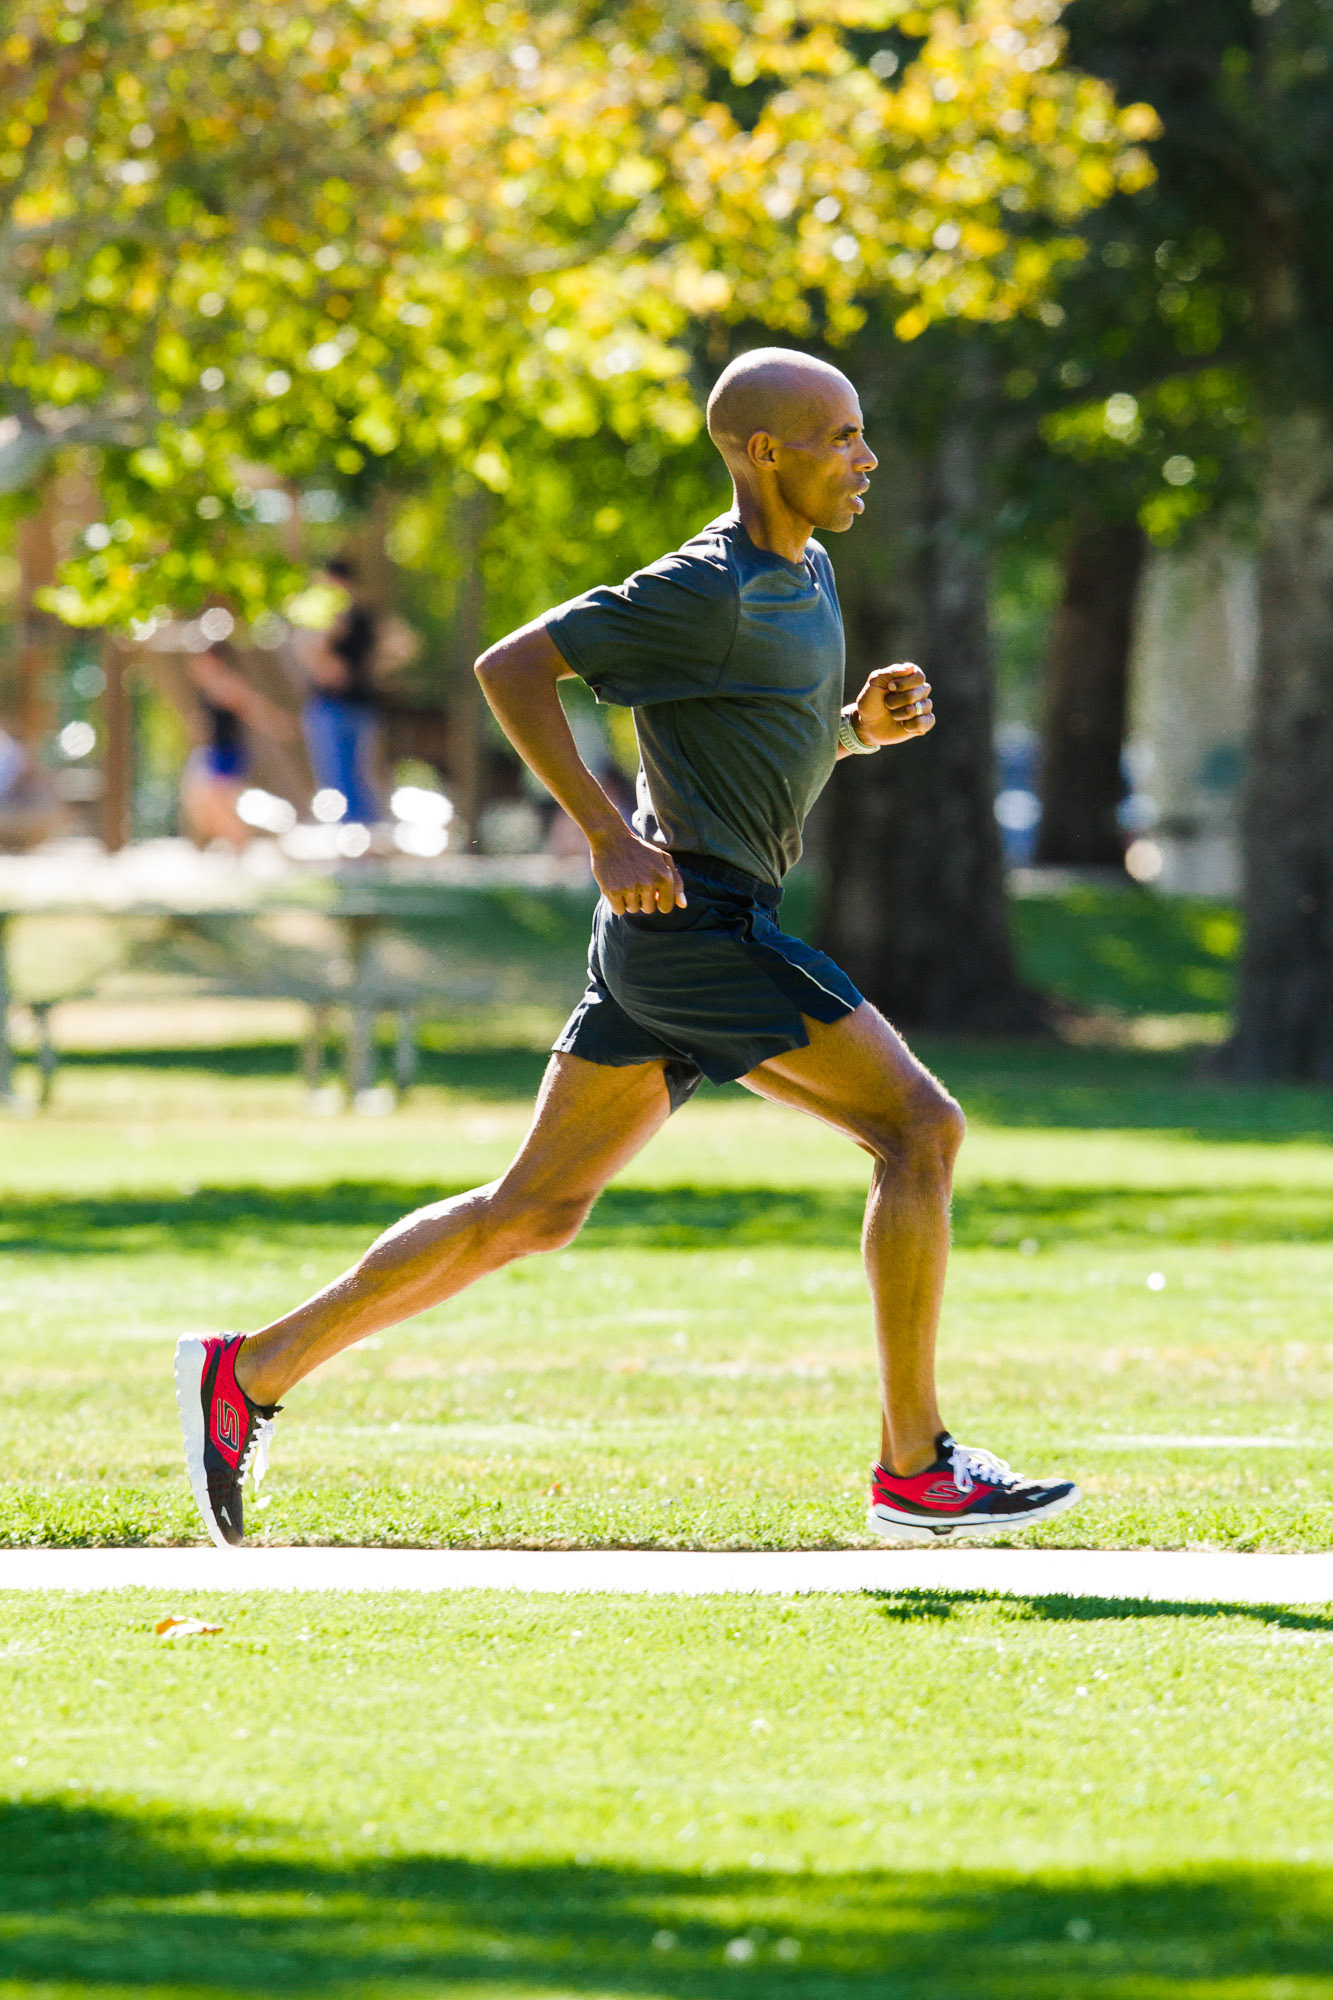 Skechers Performance Division Extends Multi-Year with Elite Runner Meb | Business Wire